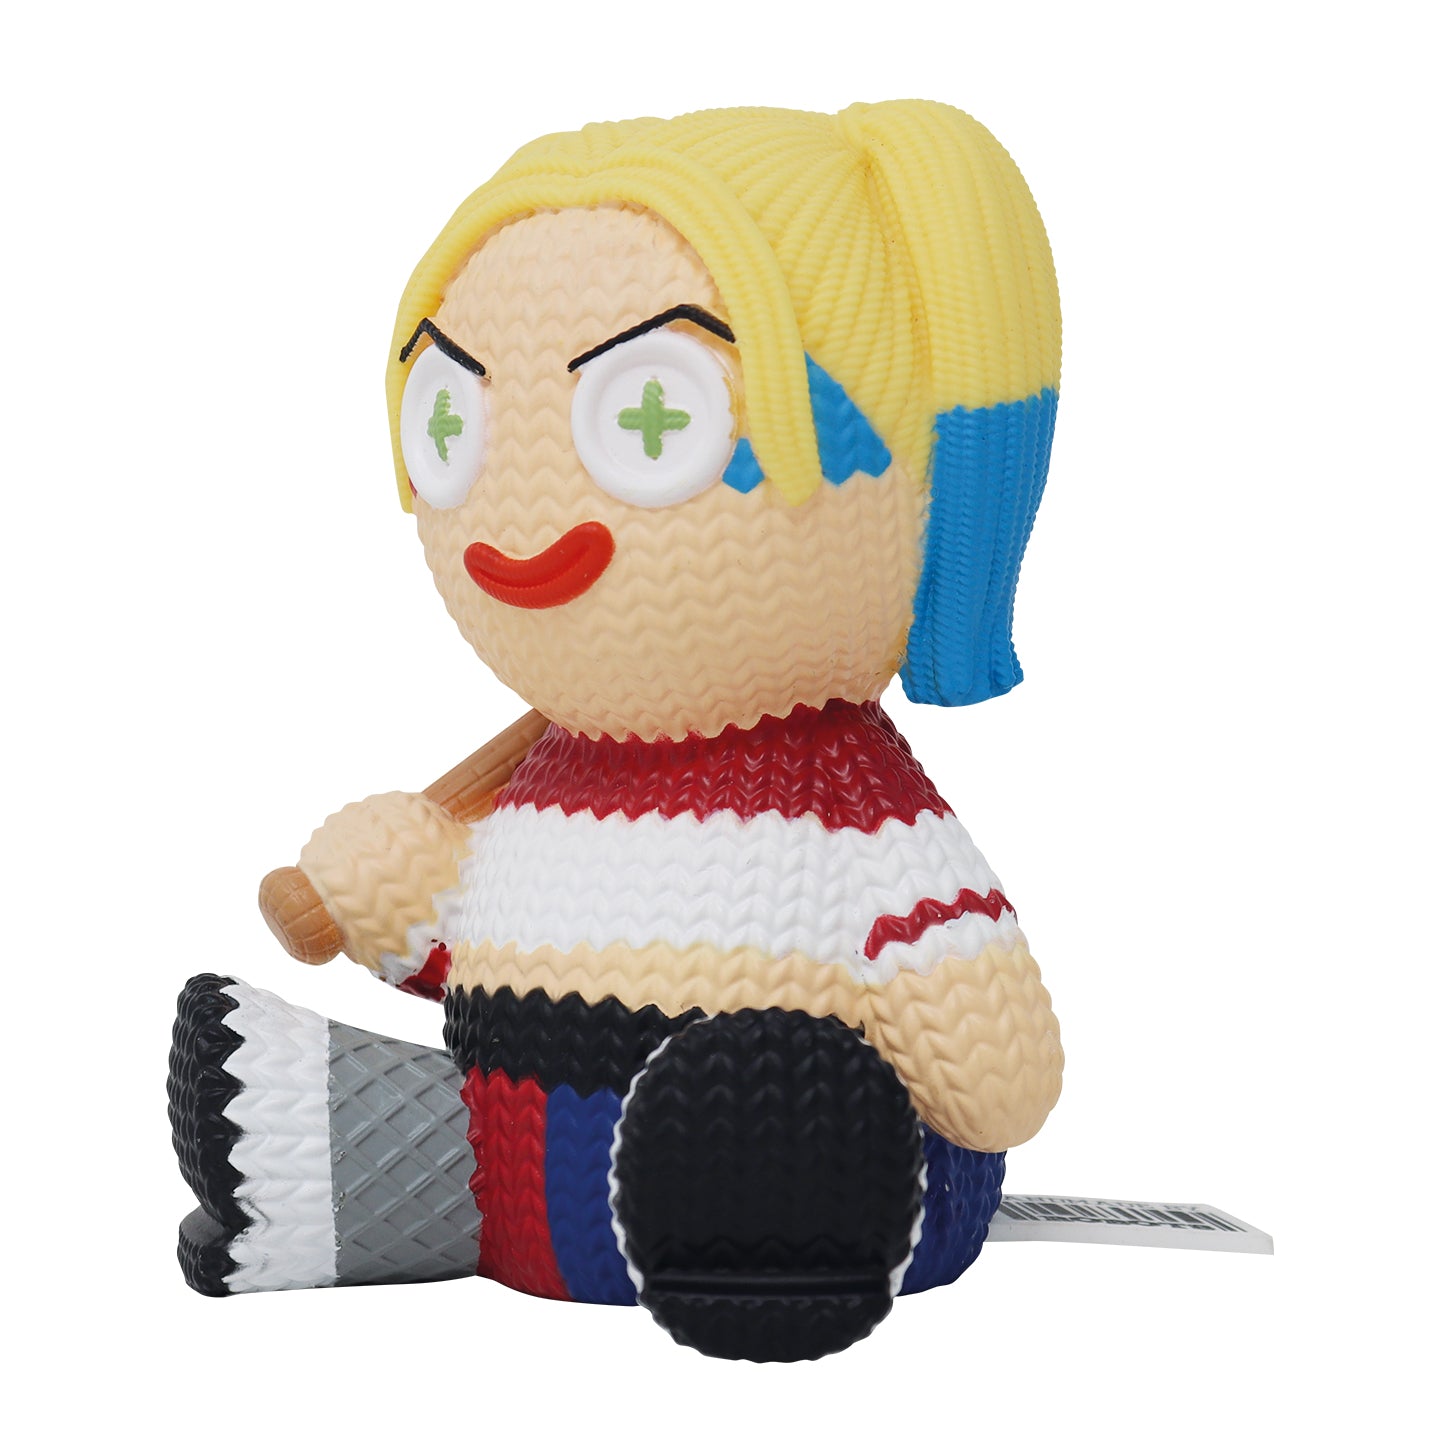 DC - Harley Quinn Collectible Vinyl Figure from Handmade By Robots